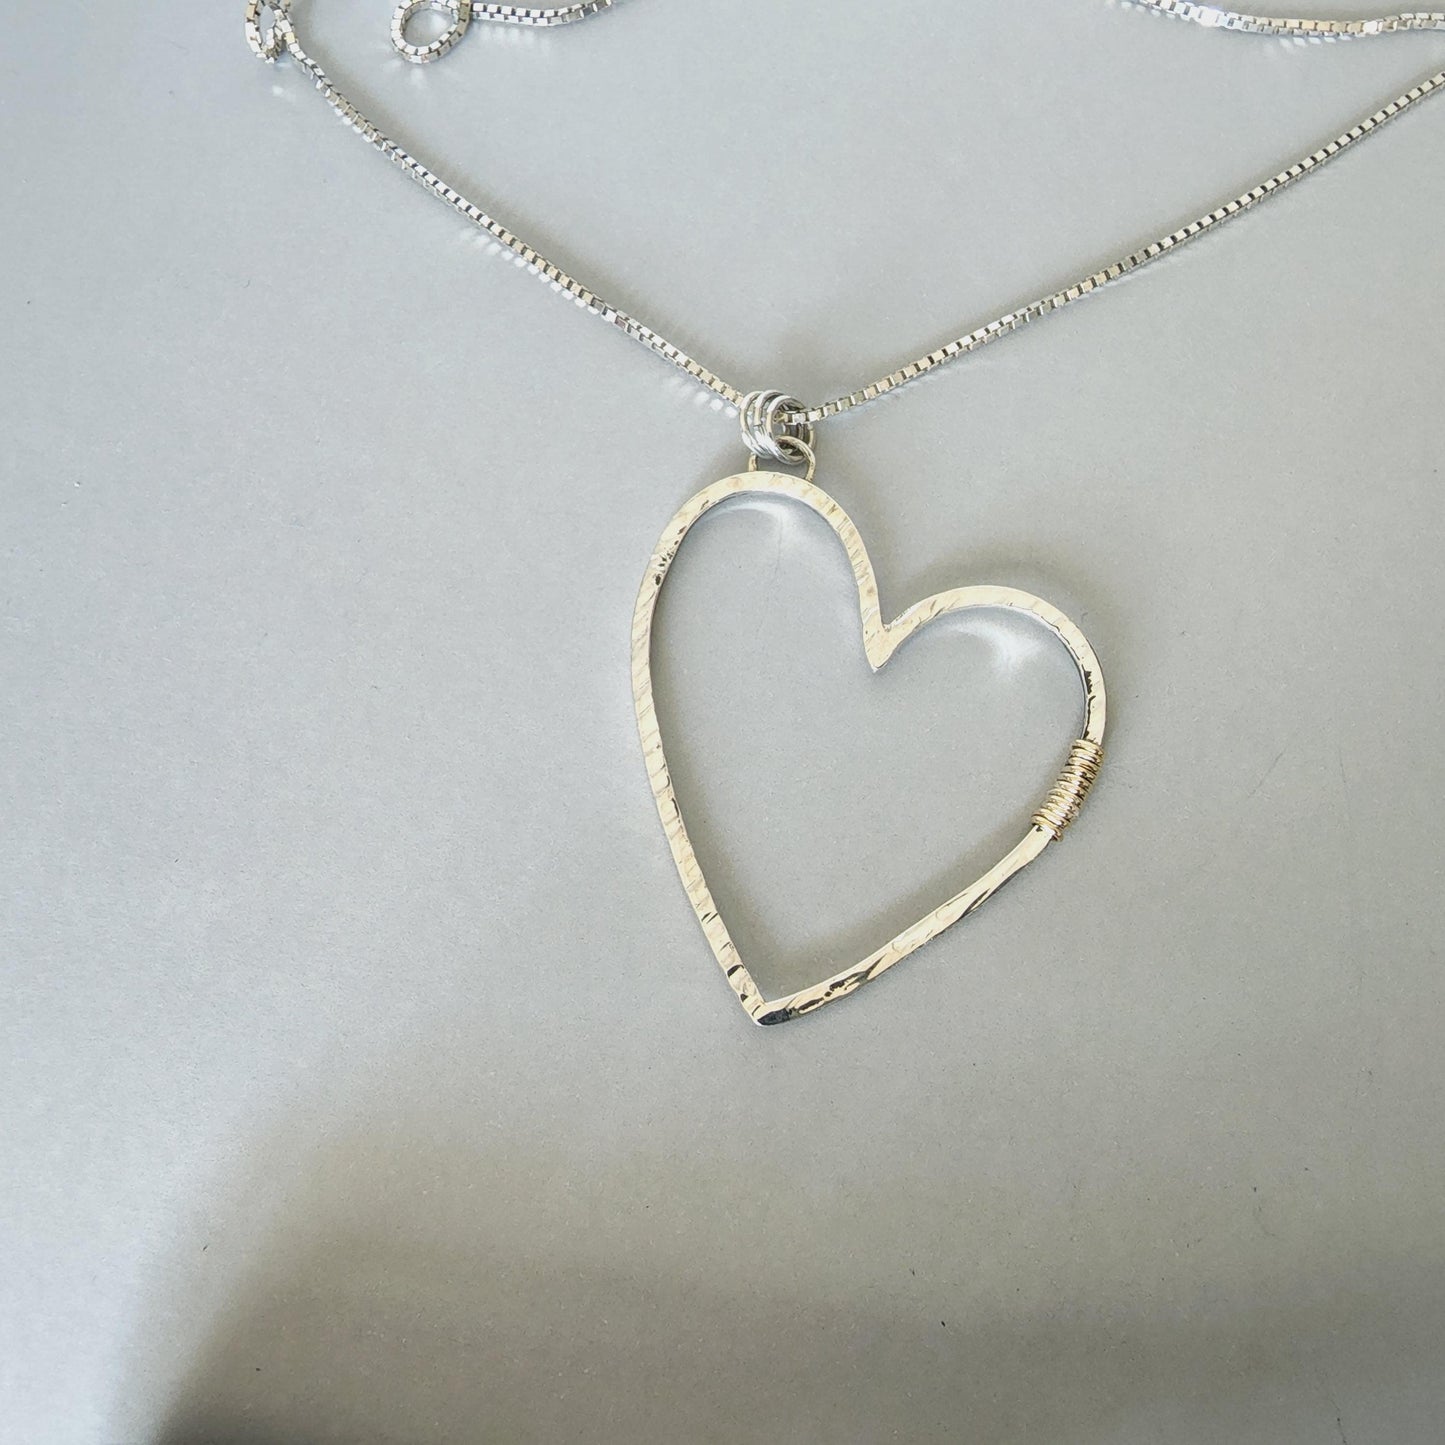 Handmade Sterling Silver Hammered Large Crazy Heart Necklace with Gold Filled Trim - Gilded Heart Designs